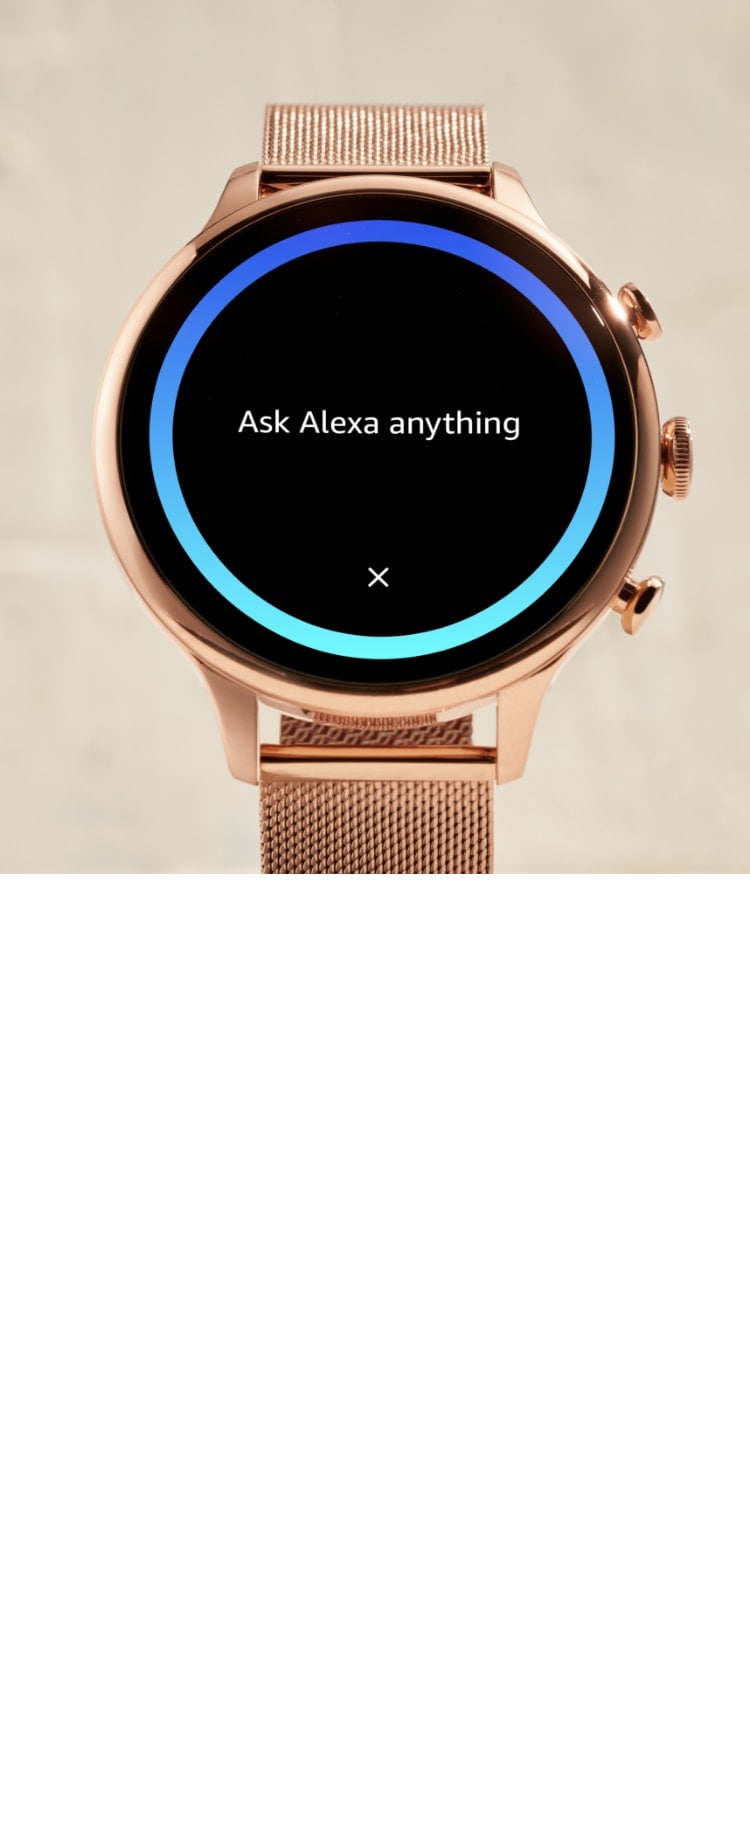 A rose gold-tone stainless steel Gen 6 smartwatch with Alexa app on the dial.